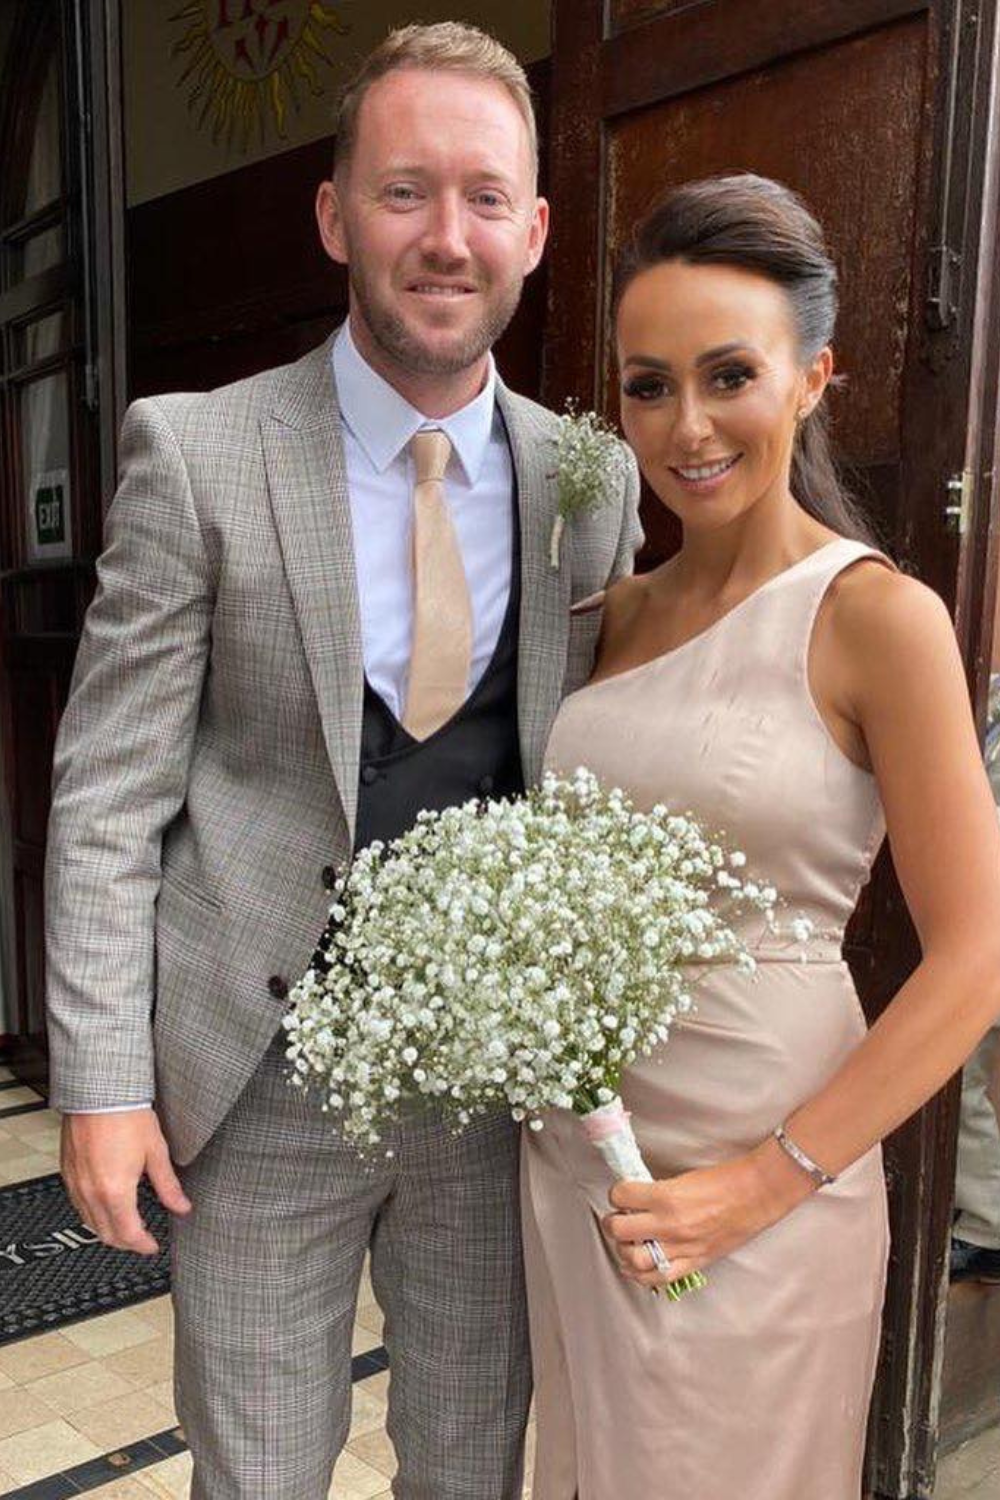 Aiden McGeady And His Wife At A Wedding